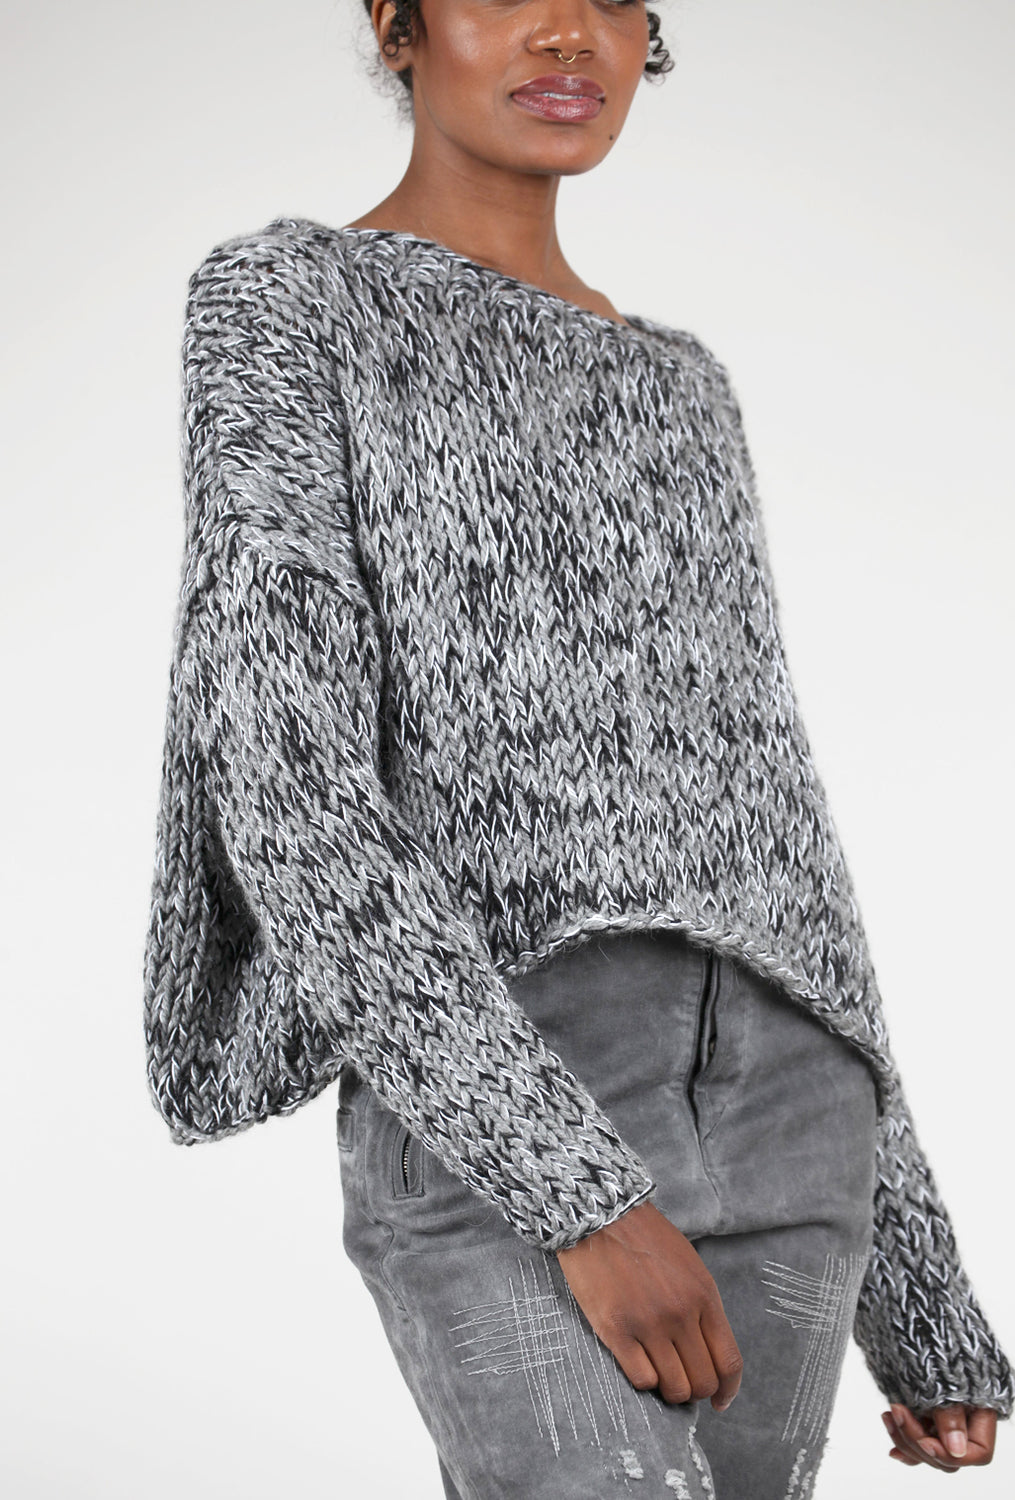 Umit Unal Hand-Knit Chunky Pepper Sweater, Gray/Black 